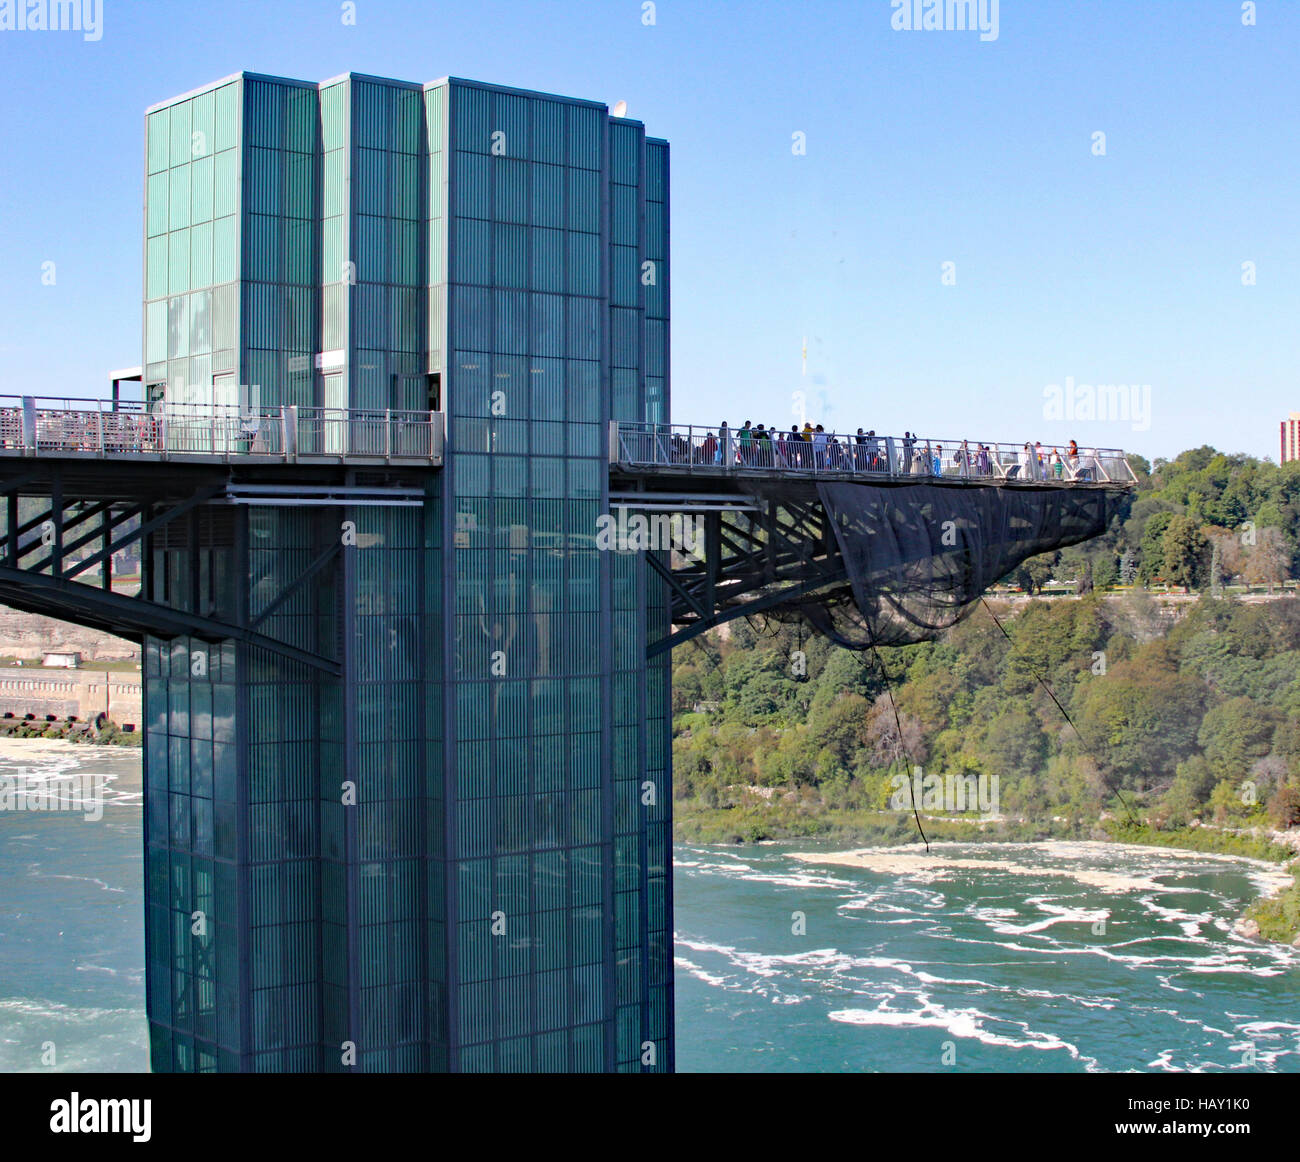 Observation tower at Niagara Falls, New York, American side with views of both American and Canadian falls Stock Photo